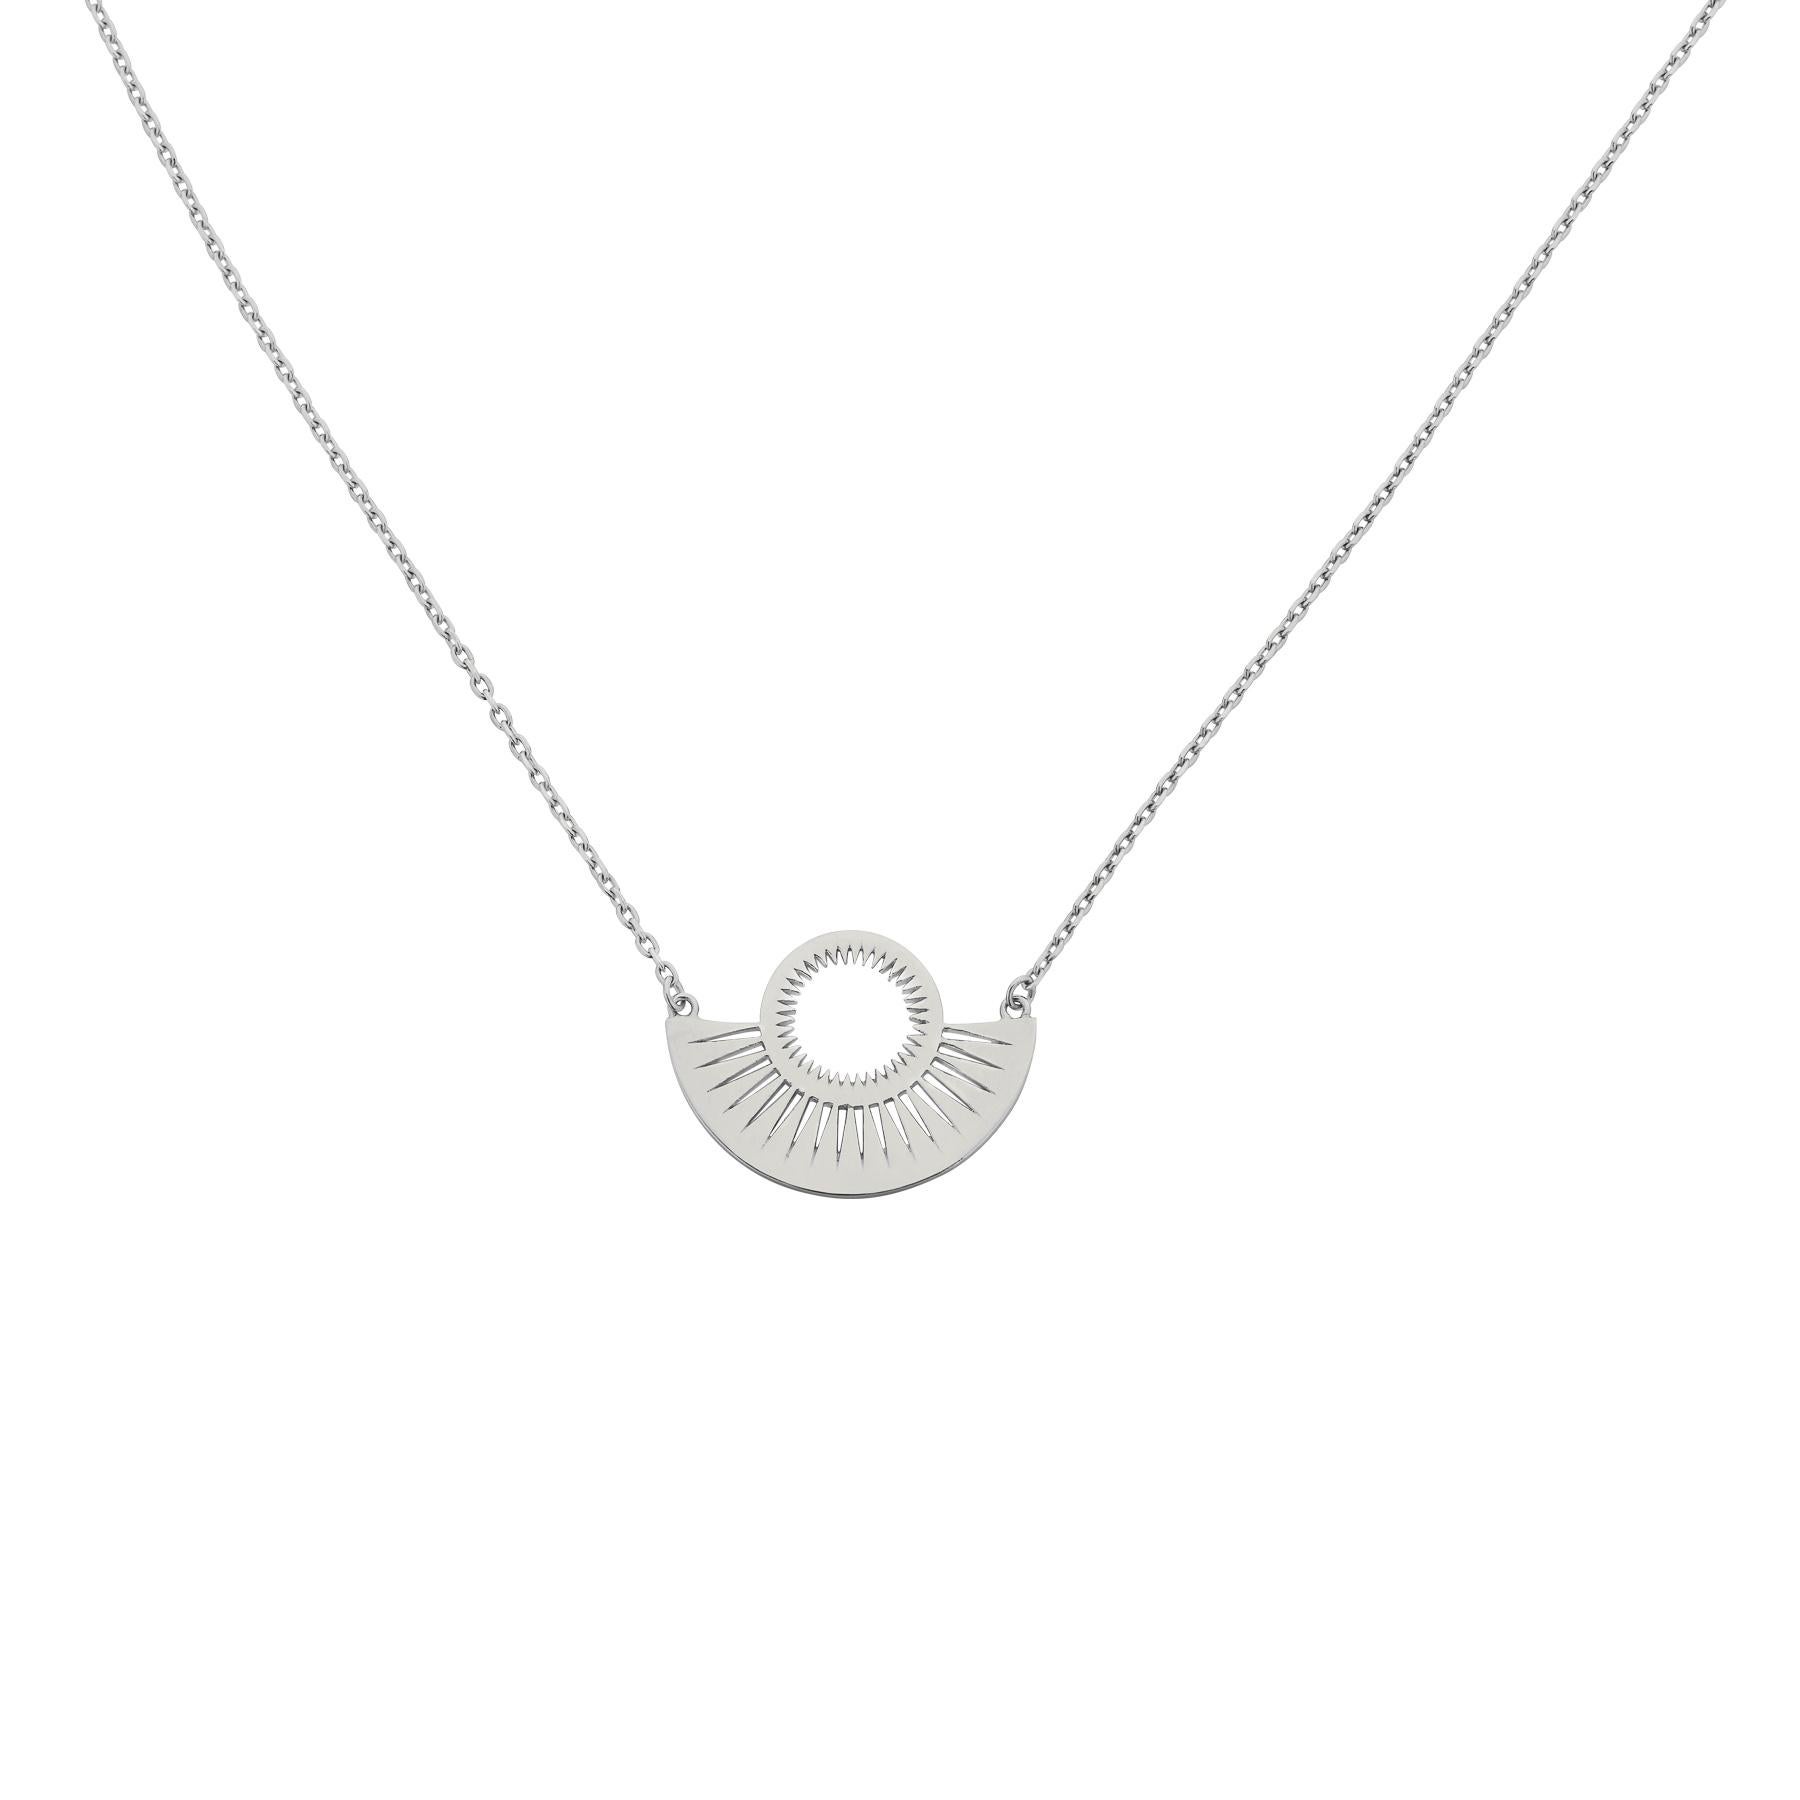 Zoe and Morgan Silver Pocket Full of Sunshine Necklace For Sale